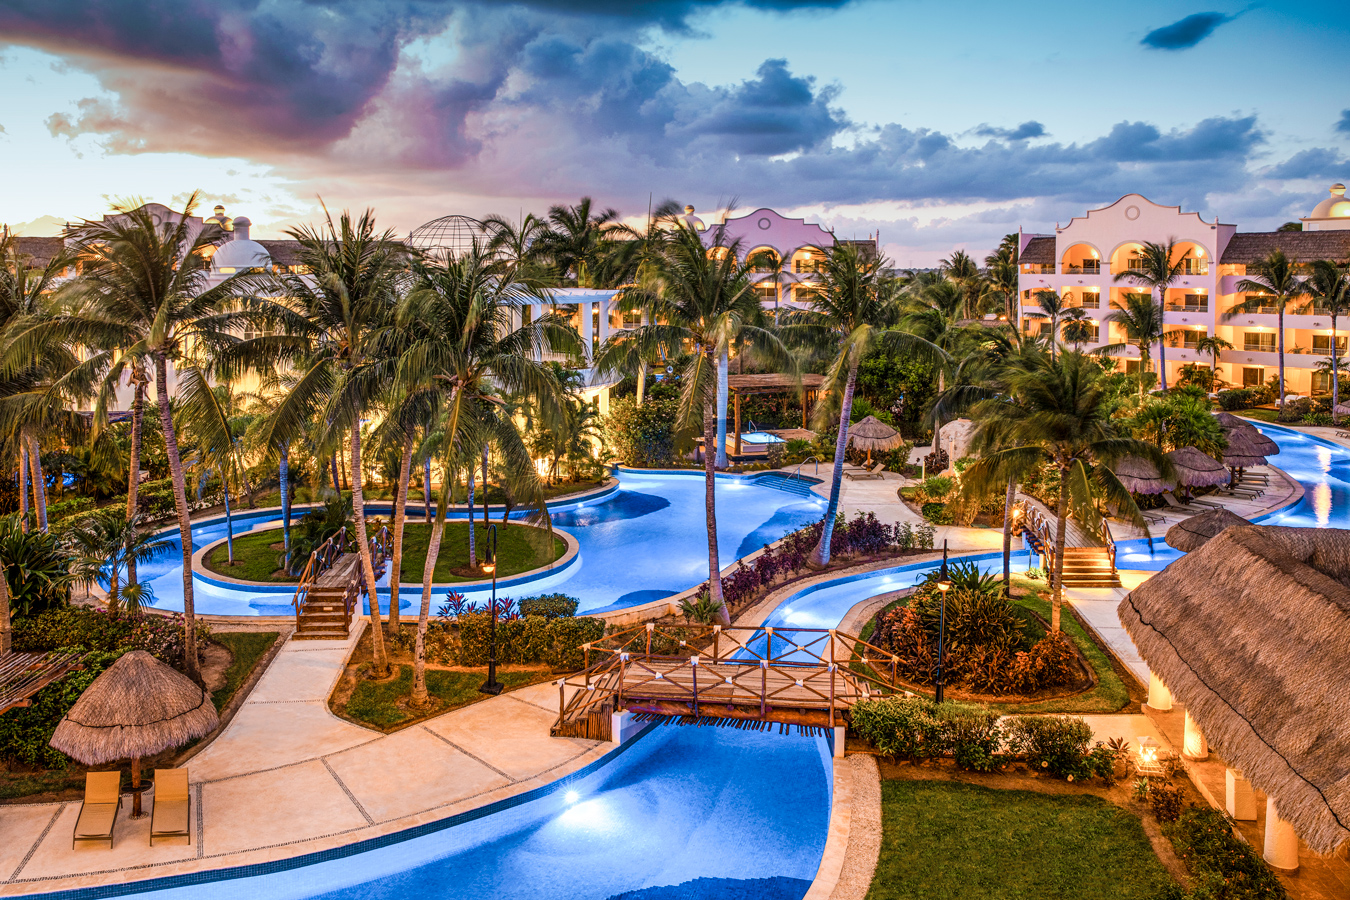 Excellence Riviera Cancun, one of the best All Inclusive resorts in the world